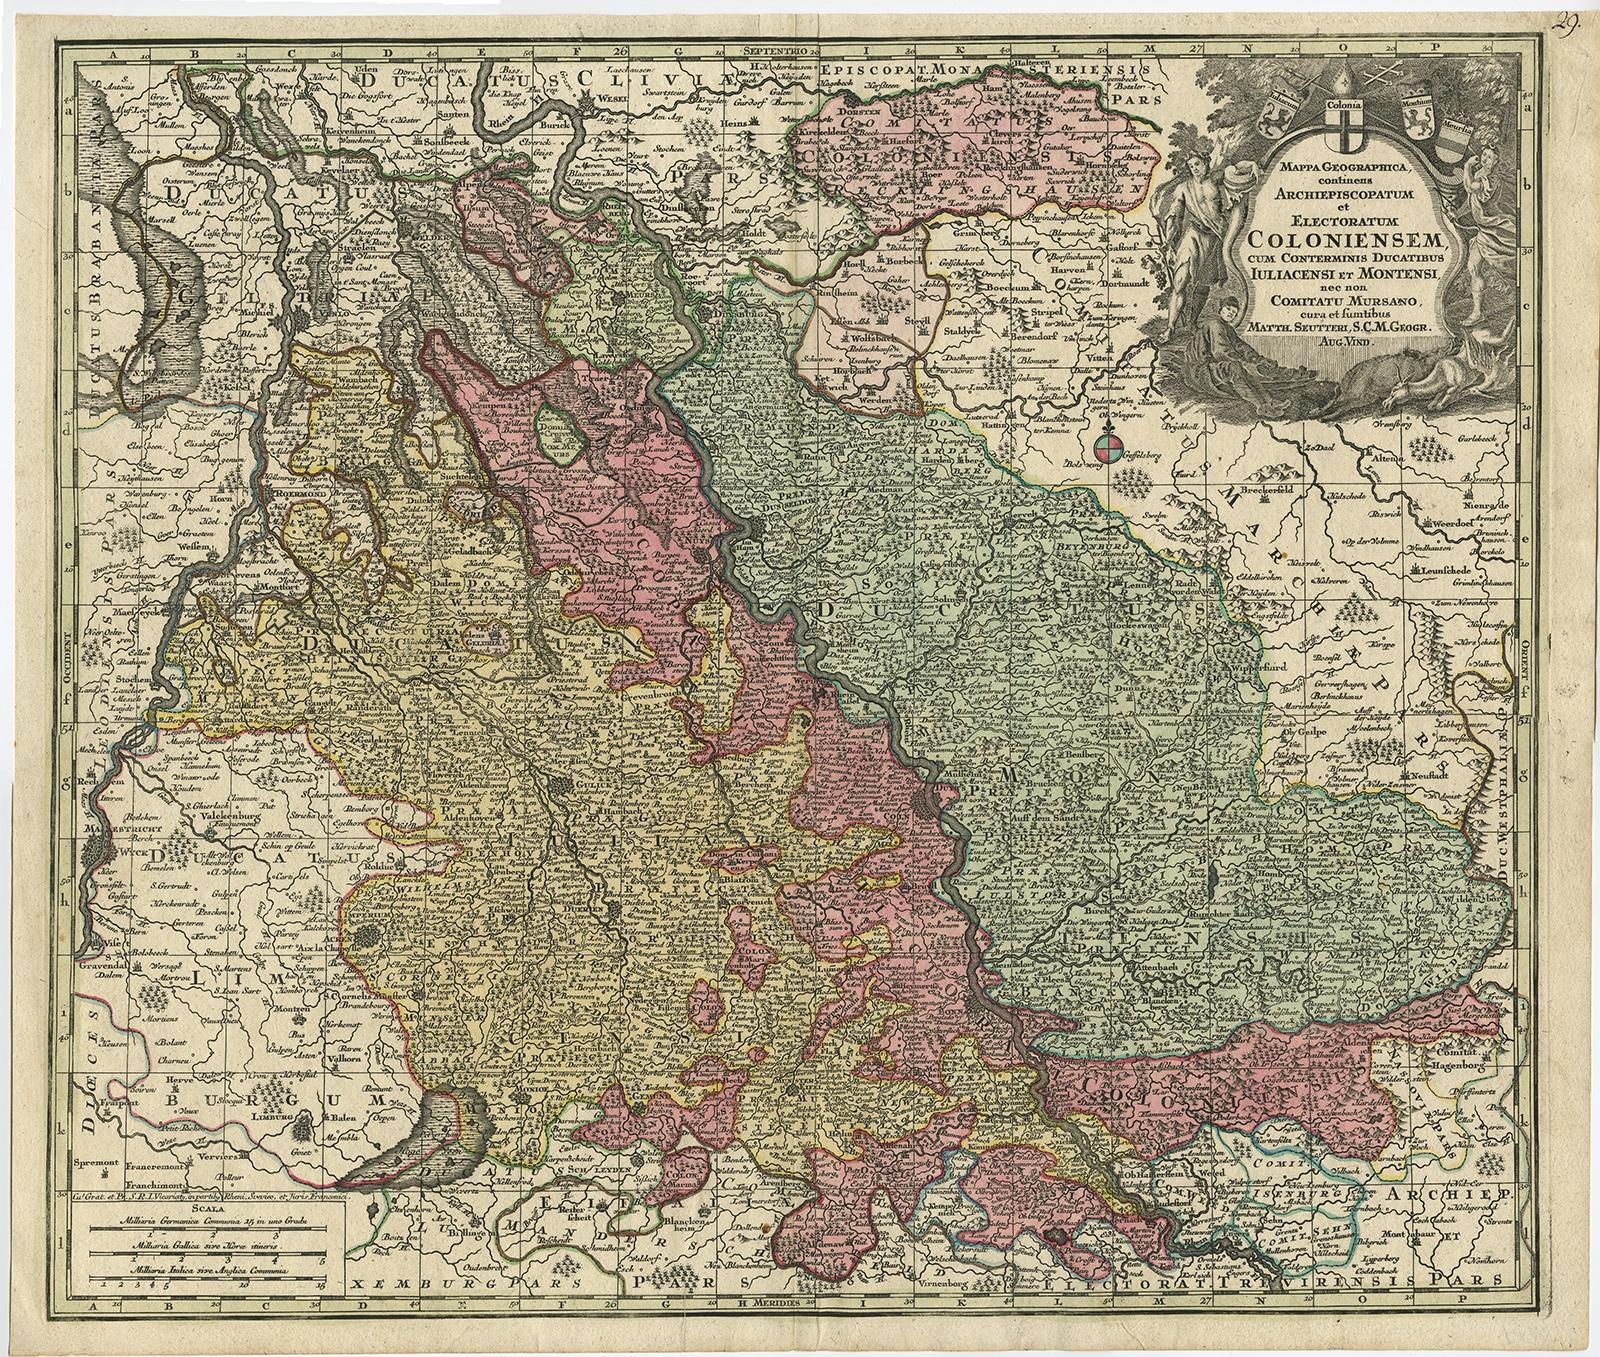 Antique map Germany titled 'Mappa Geographica continens Archiepiscopatum et Electoratum Coloniensem (..)'. 

This antique map depicts the Rhine river and many German cities including Düsseldorf, Bonn, Köln, Duisburg and more.

Artists and